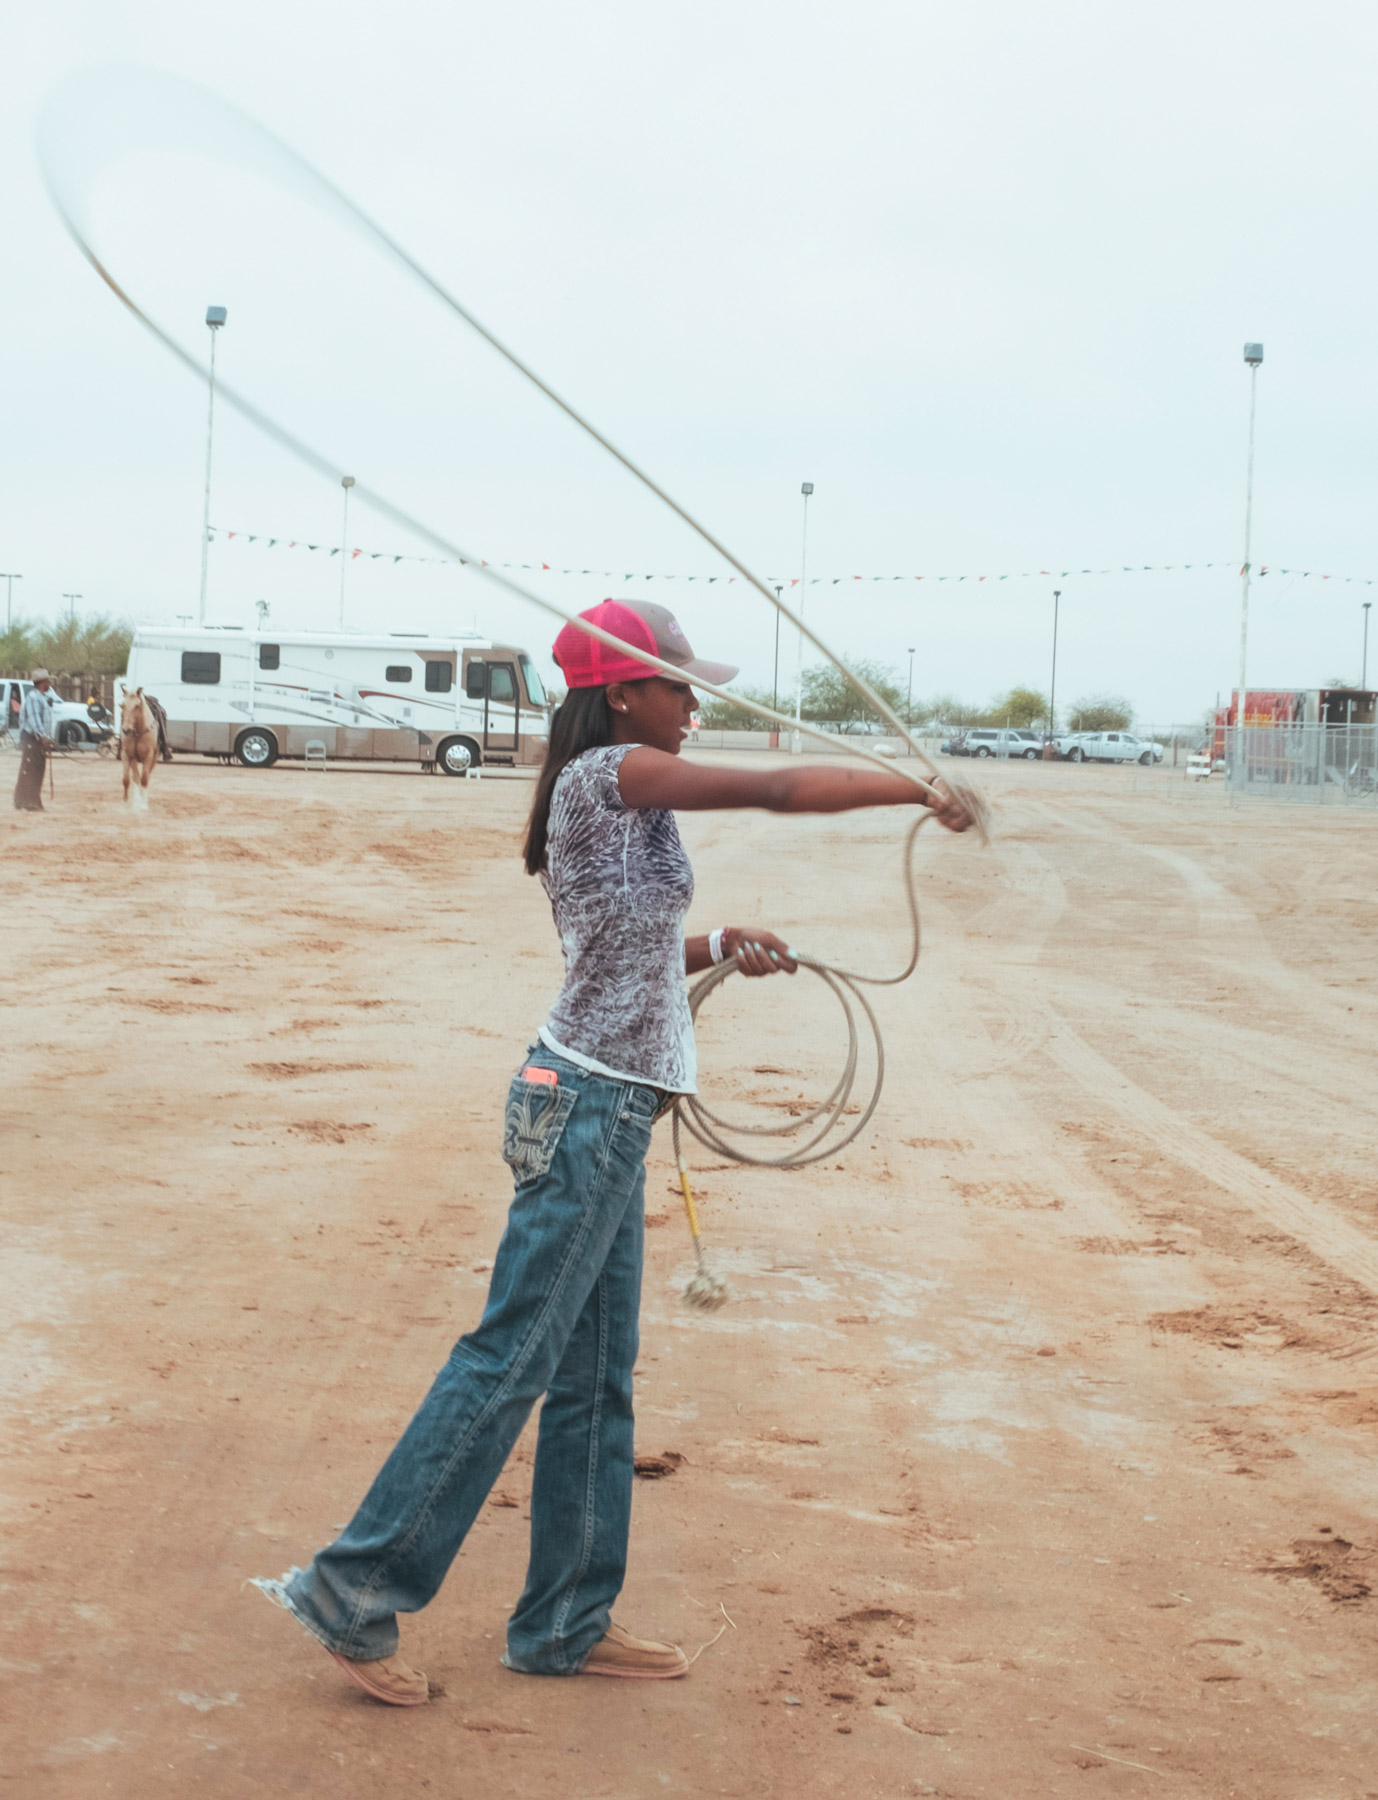 Young woman outside throwing a lasso